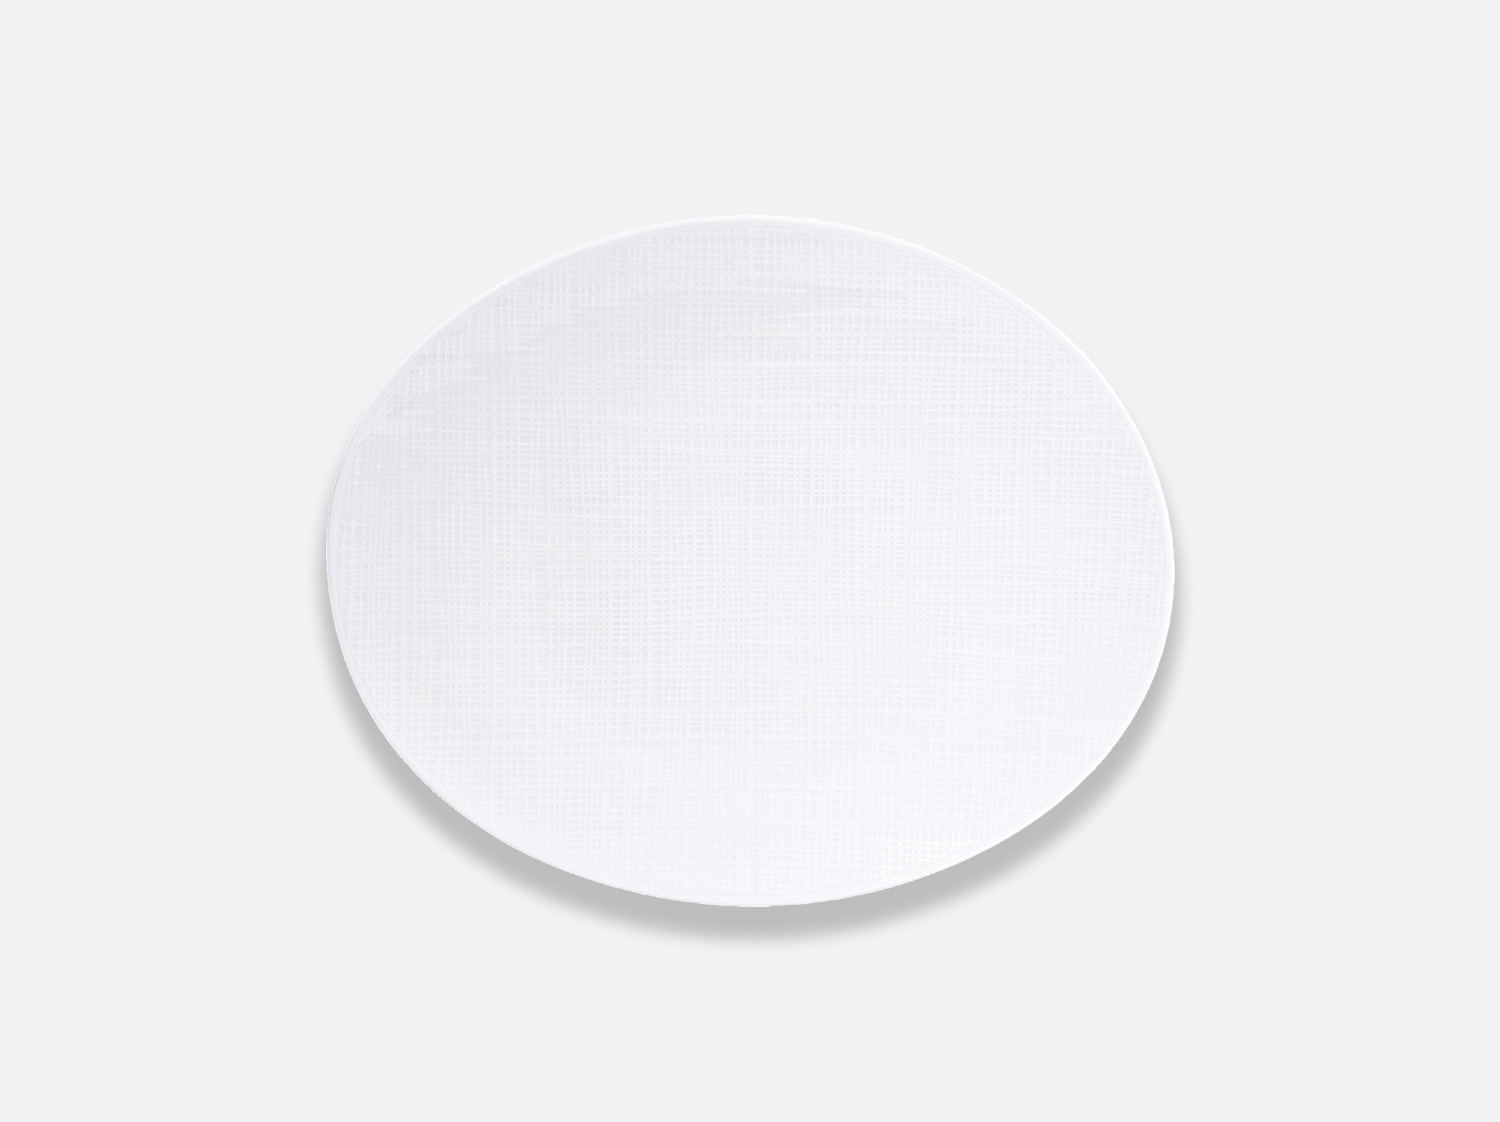 China Oval plate 10" of the collection Organza | Bernardaud